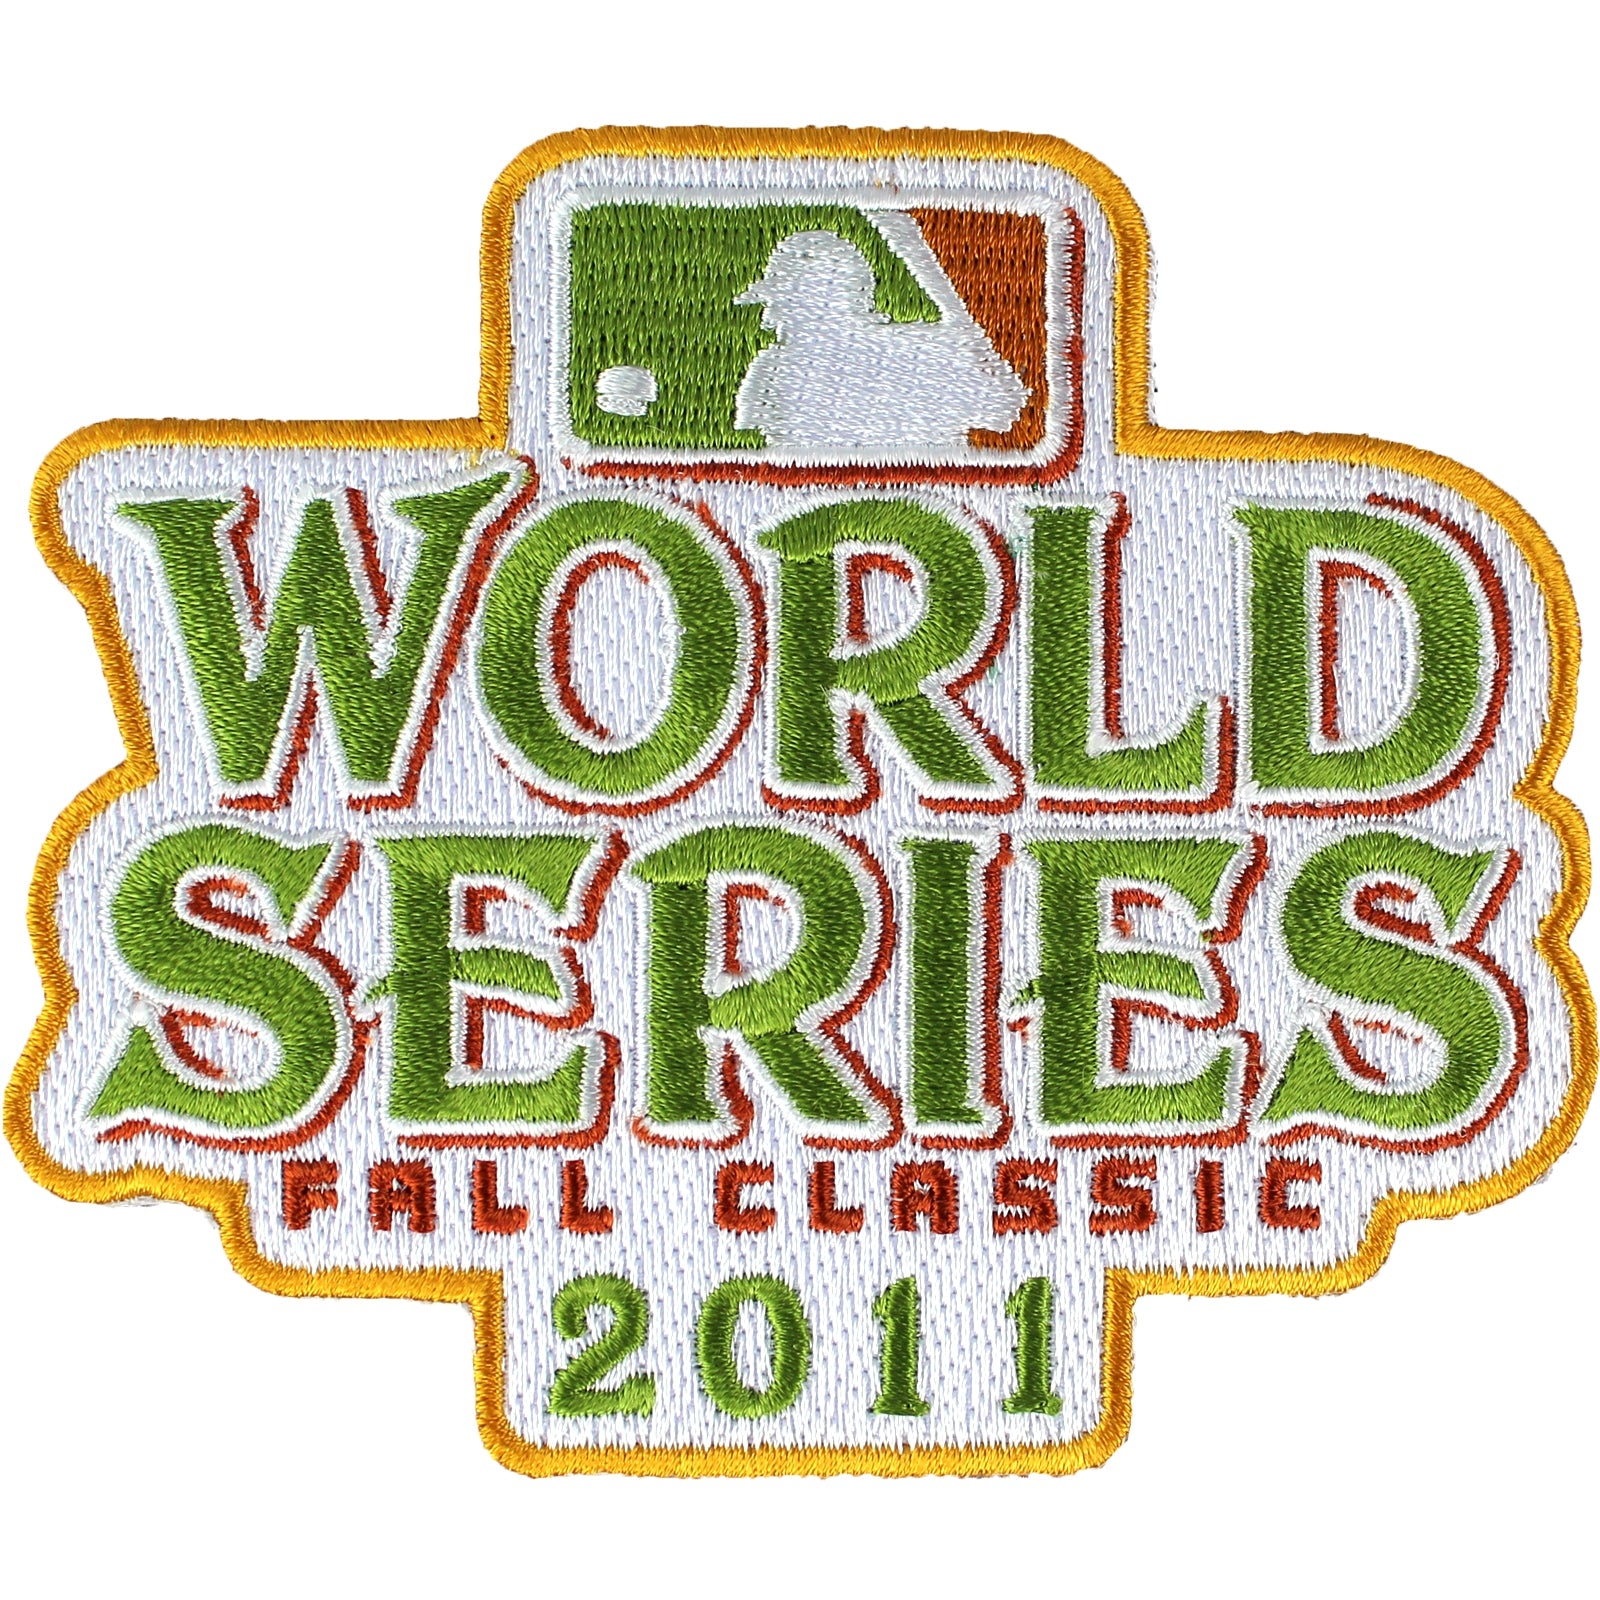 MLB 2023 World Series Collectors Patch